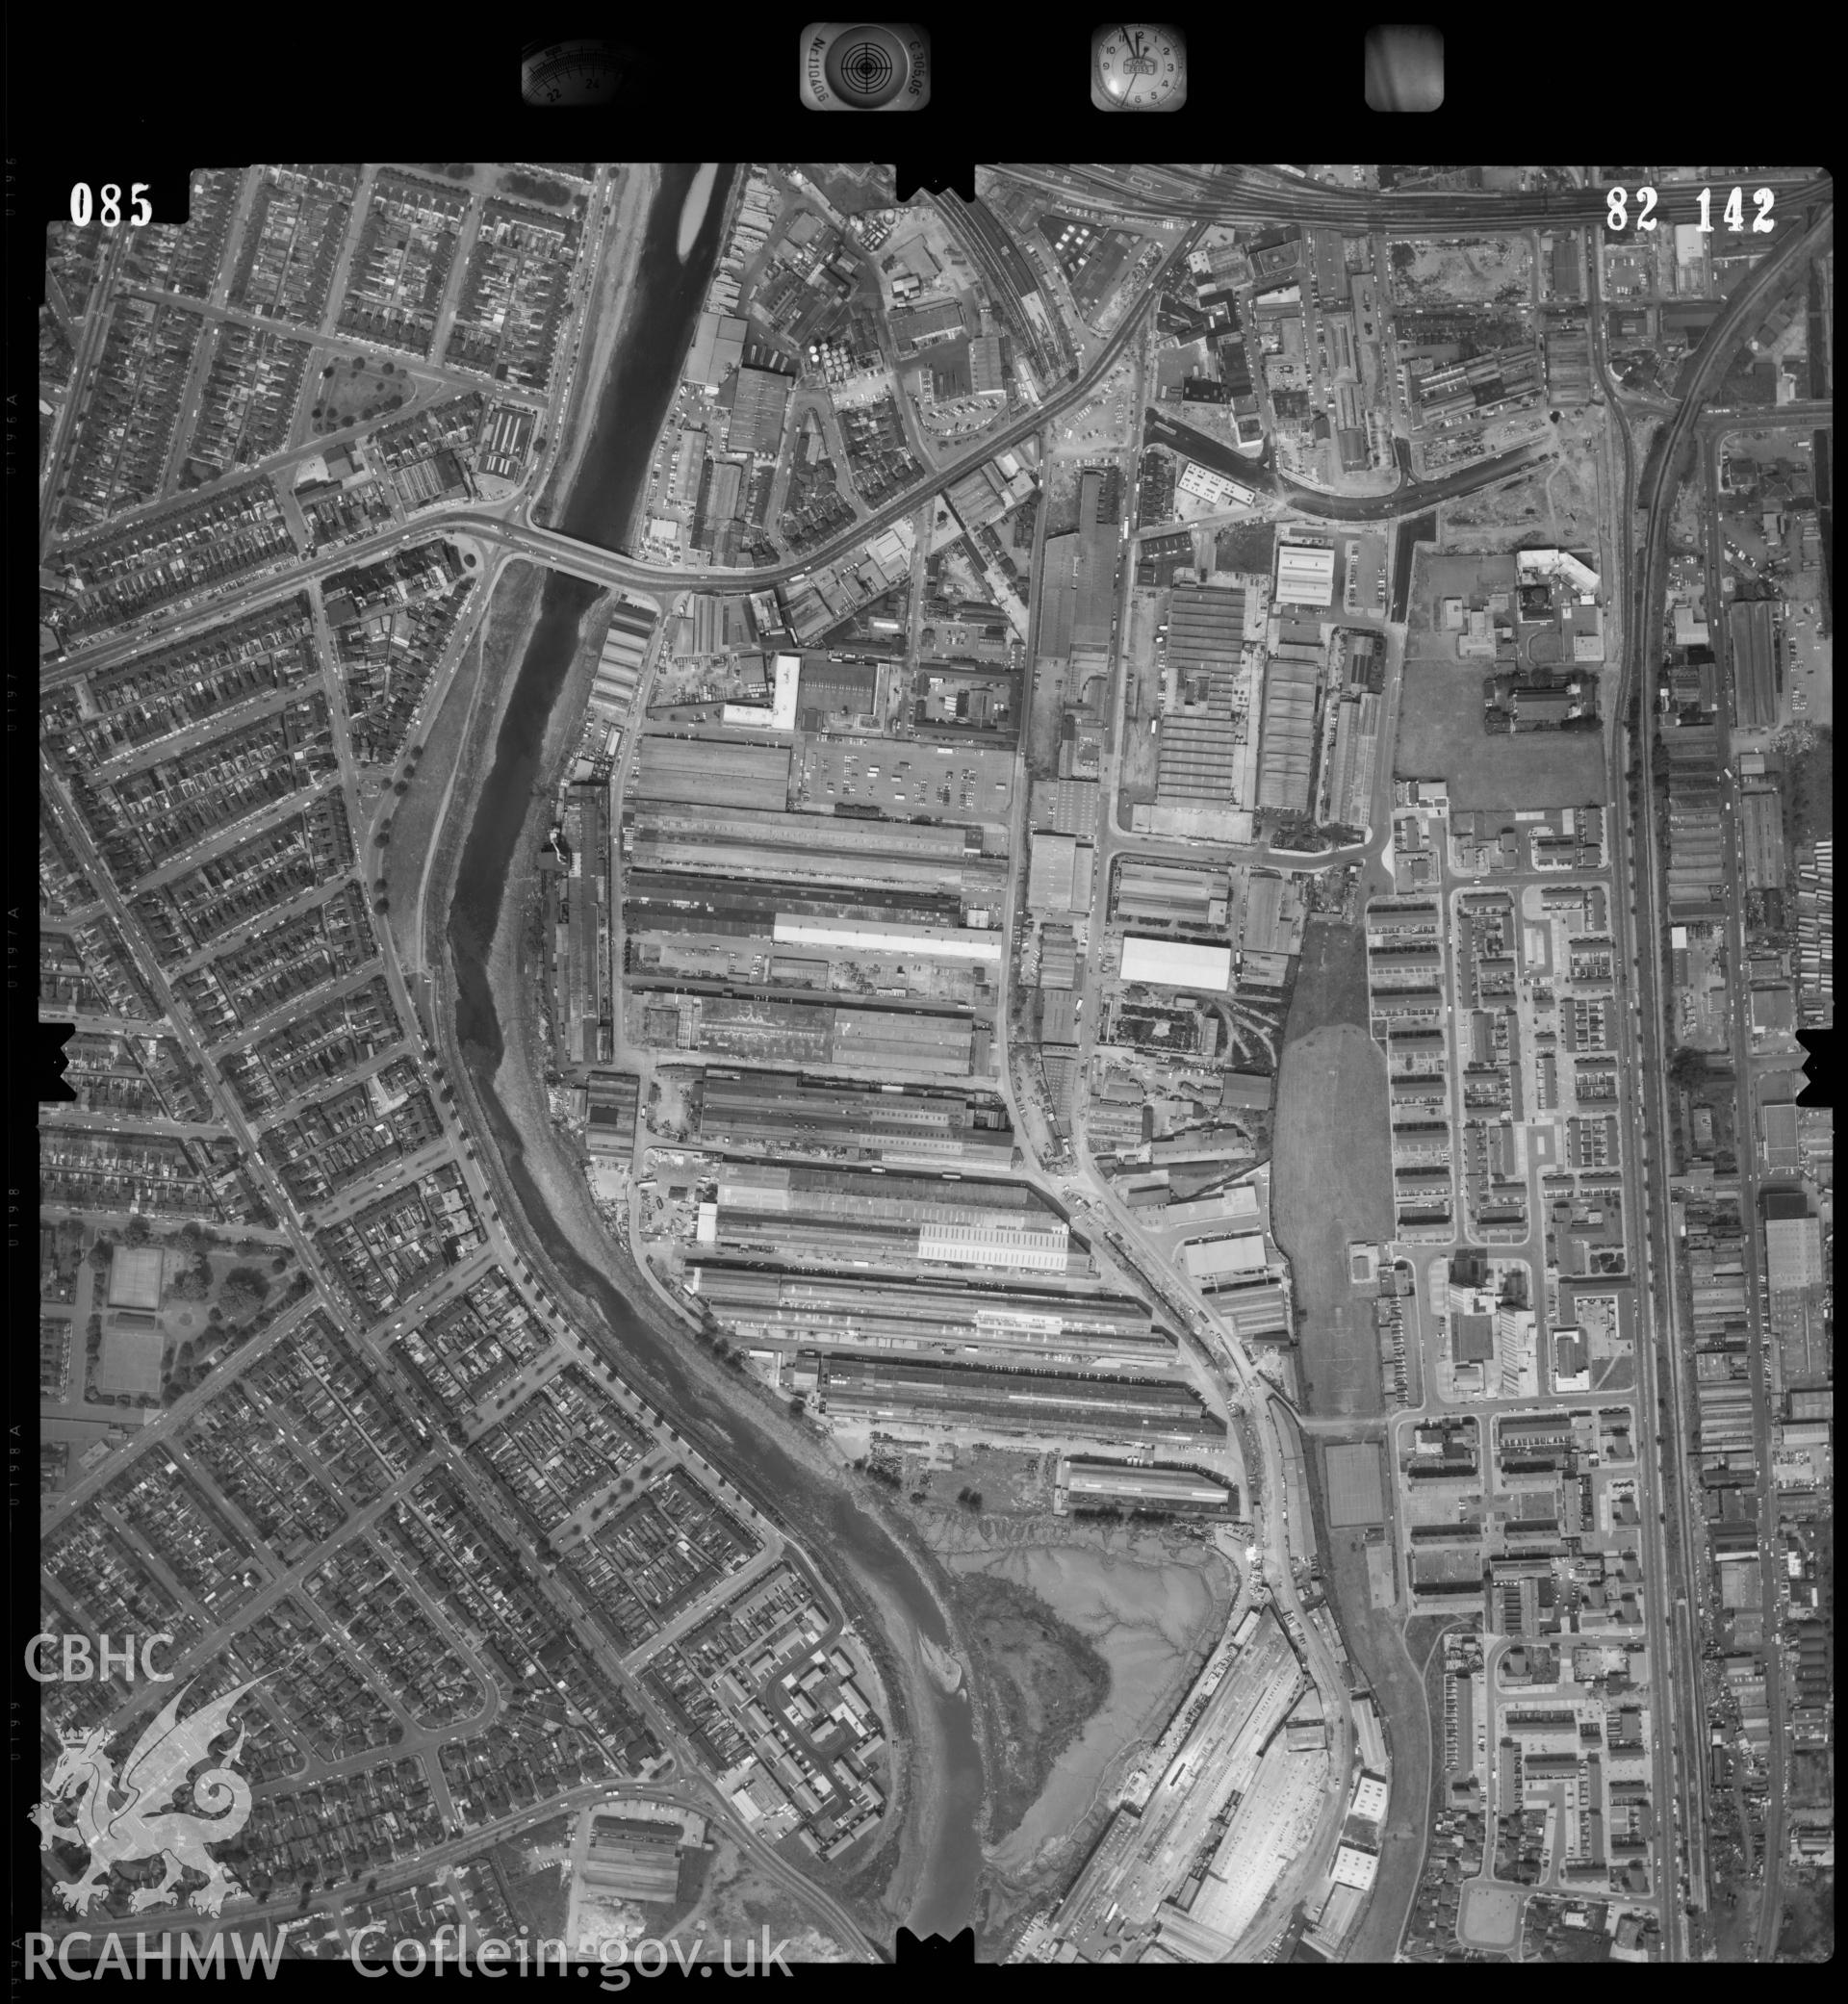 Digitized copy of an aerial photograph showing the Riverside area of Cardiff, taken by Ordnance Survey, 1982.